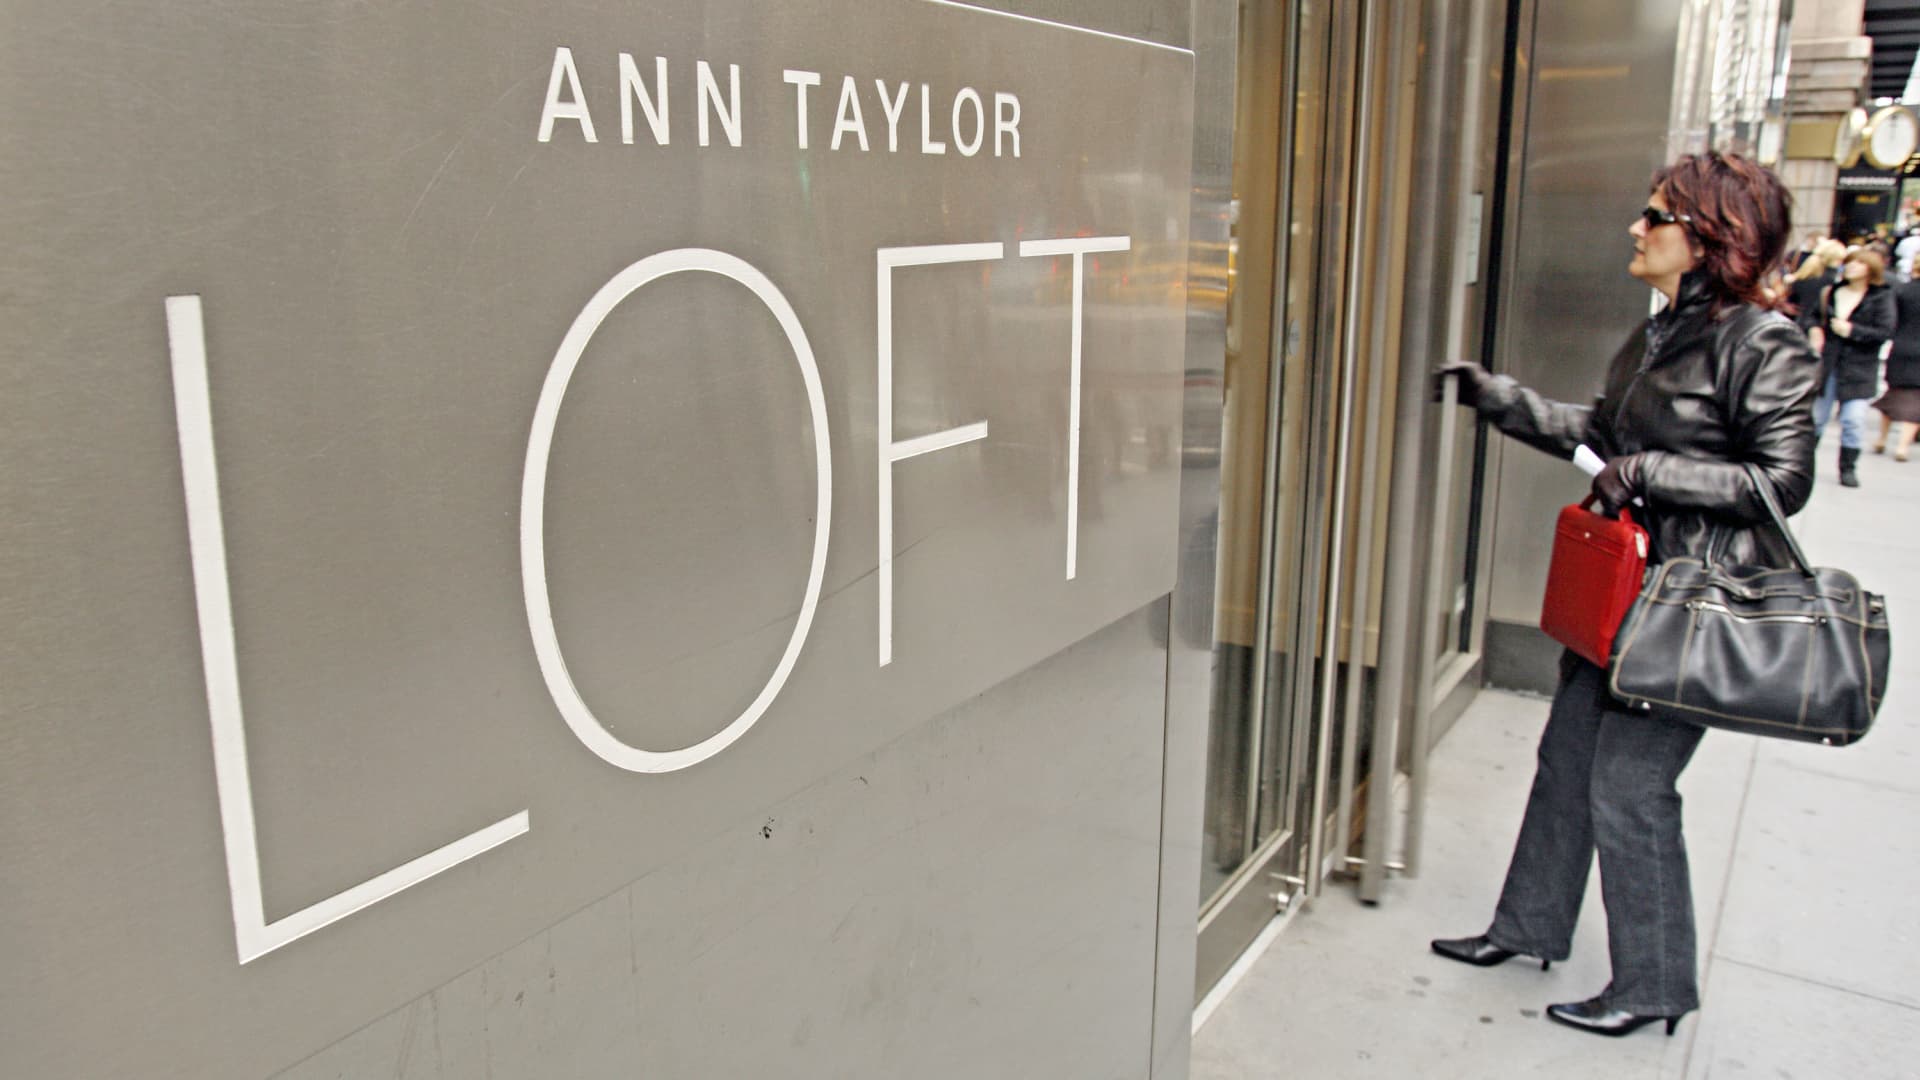 Shopper enters a Ann Taylor LOFT clothing store located on Madison Avenue in New York City.